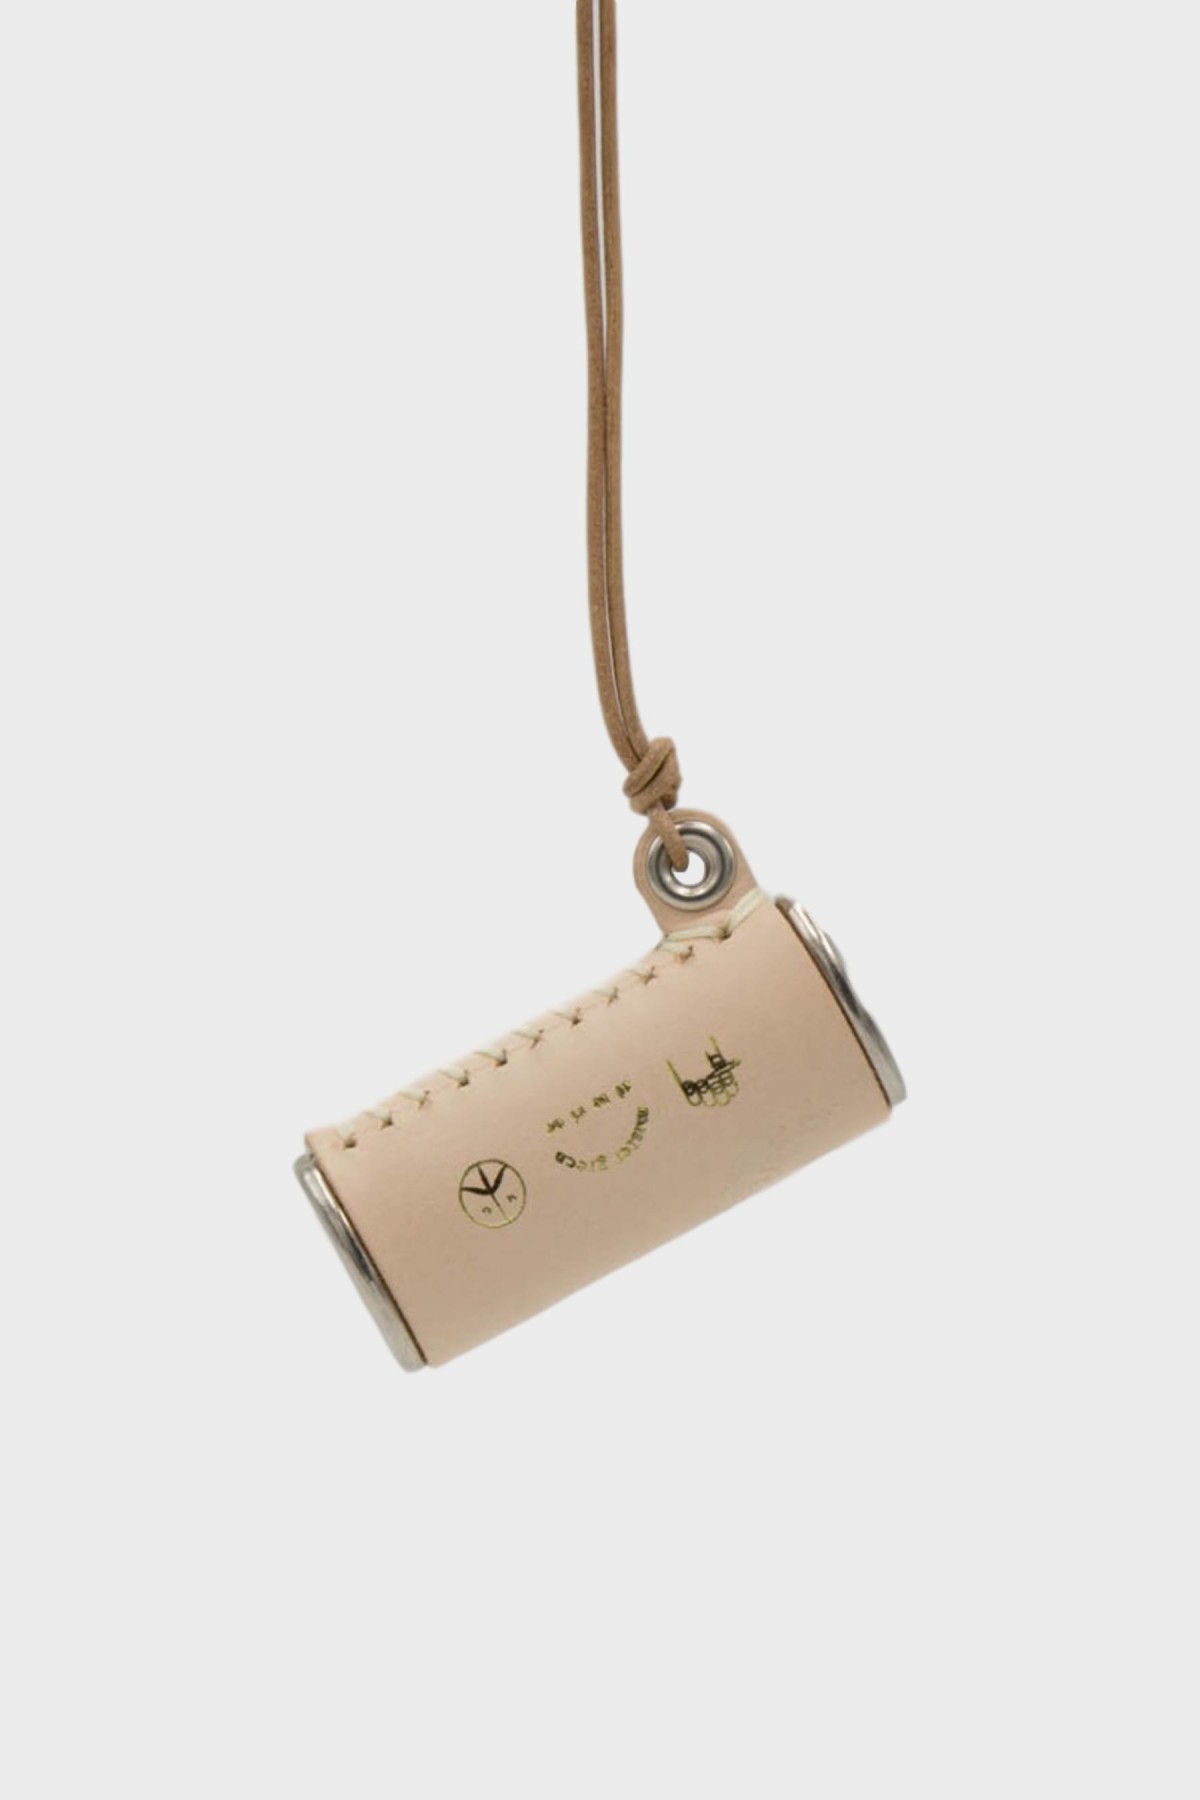 Mister Green Necklace Lighter in Natural Leather